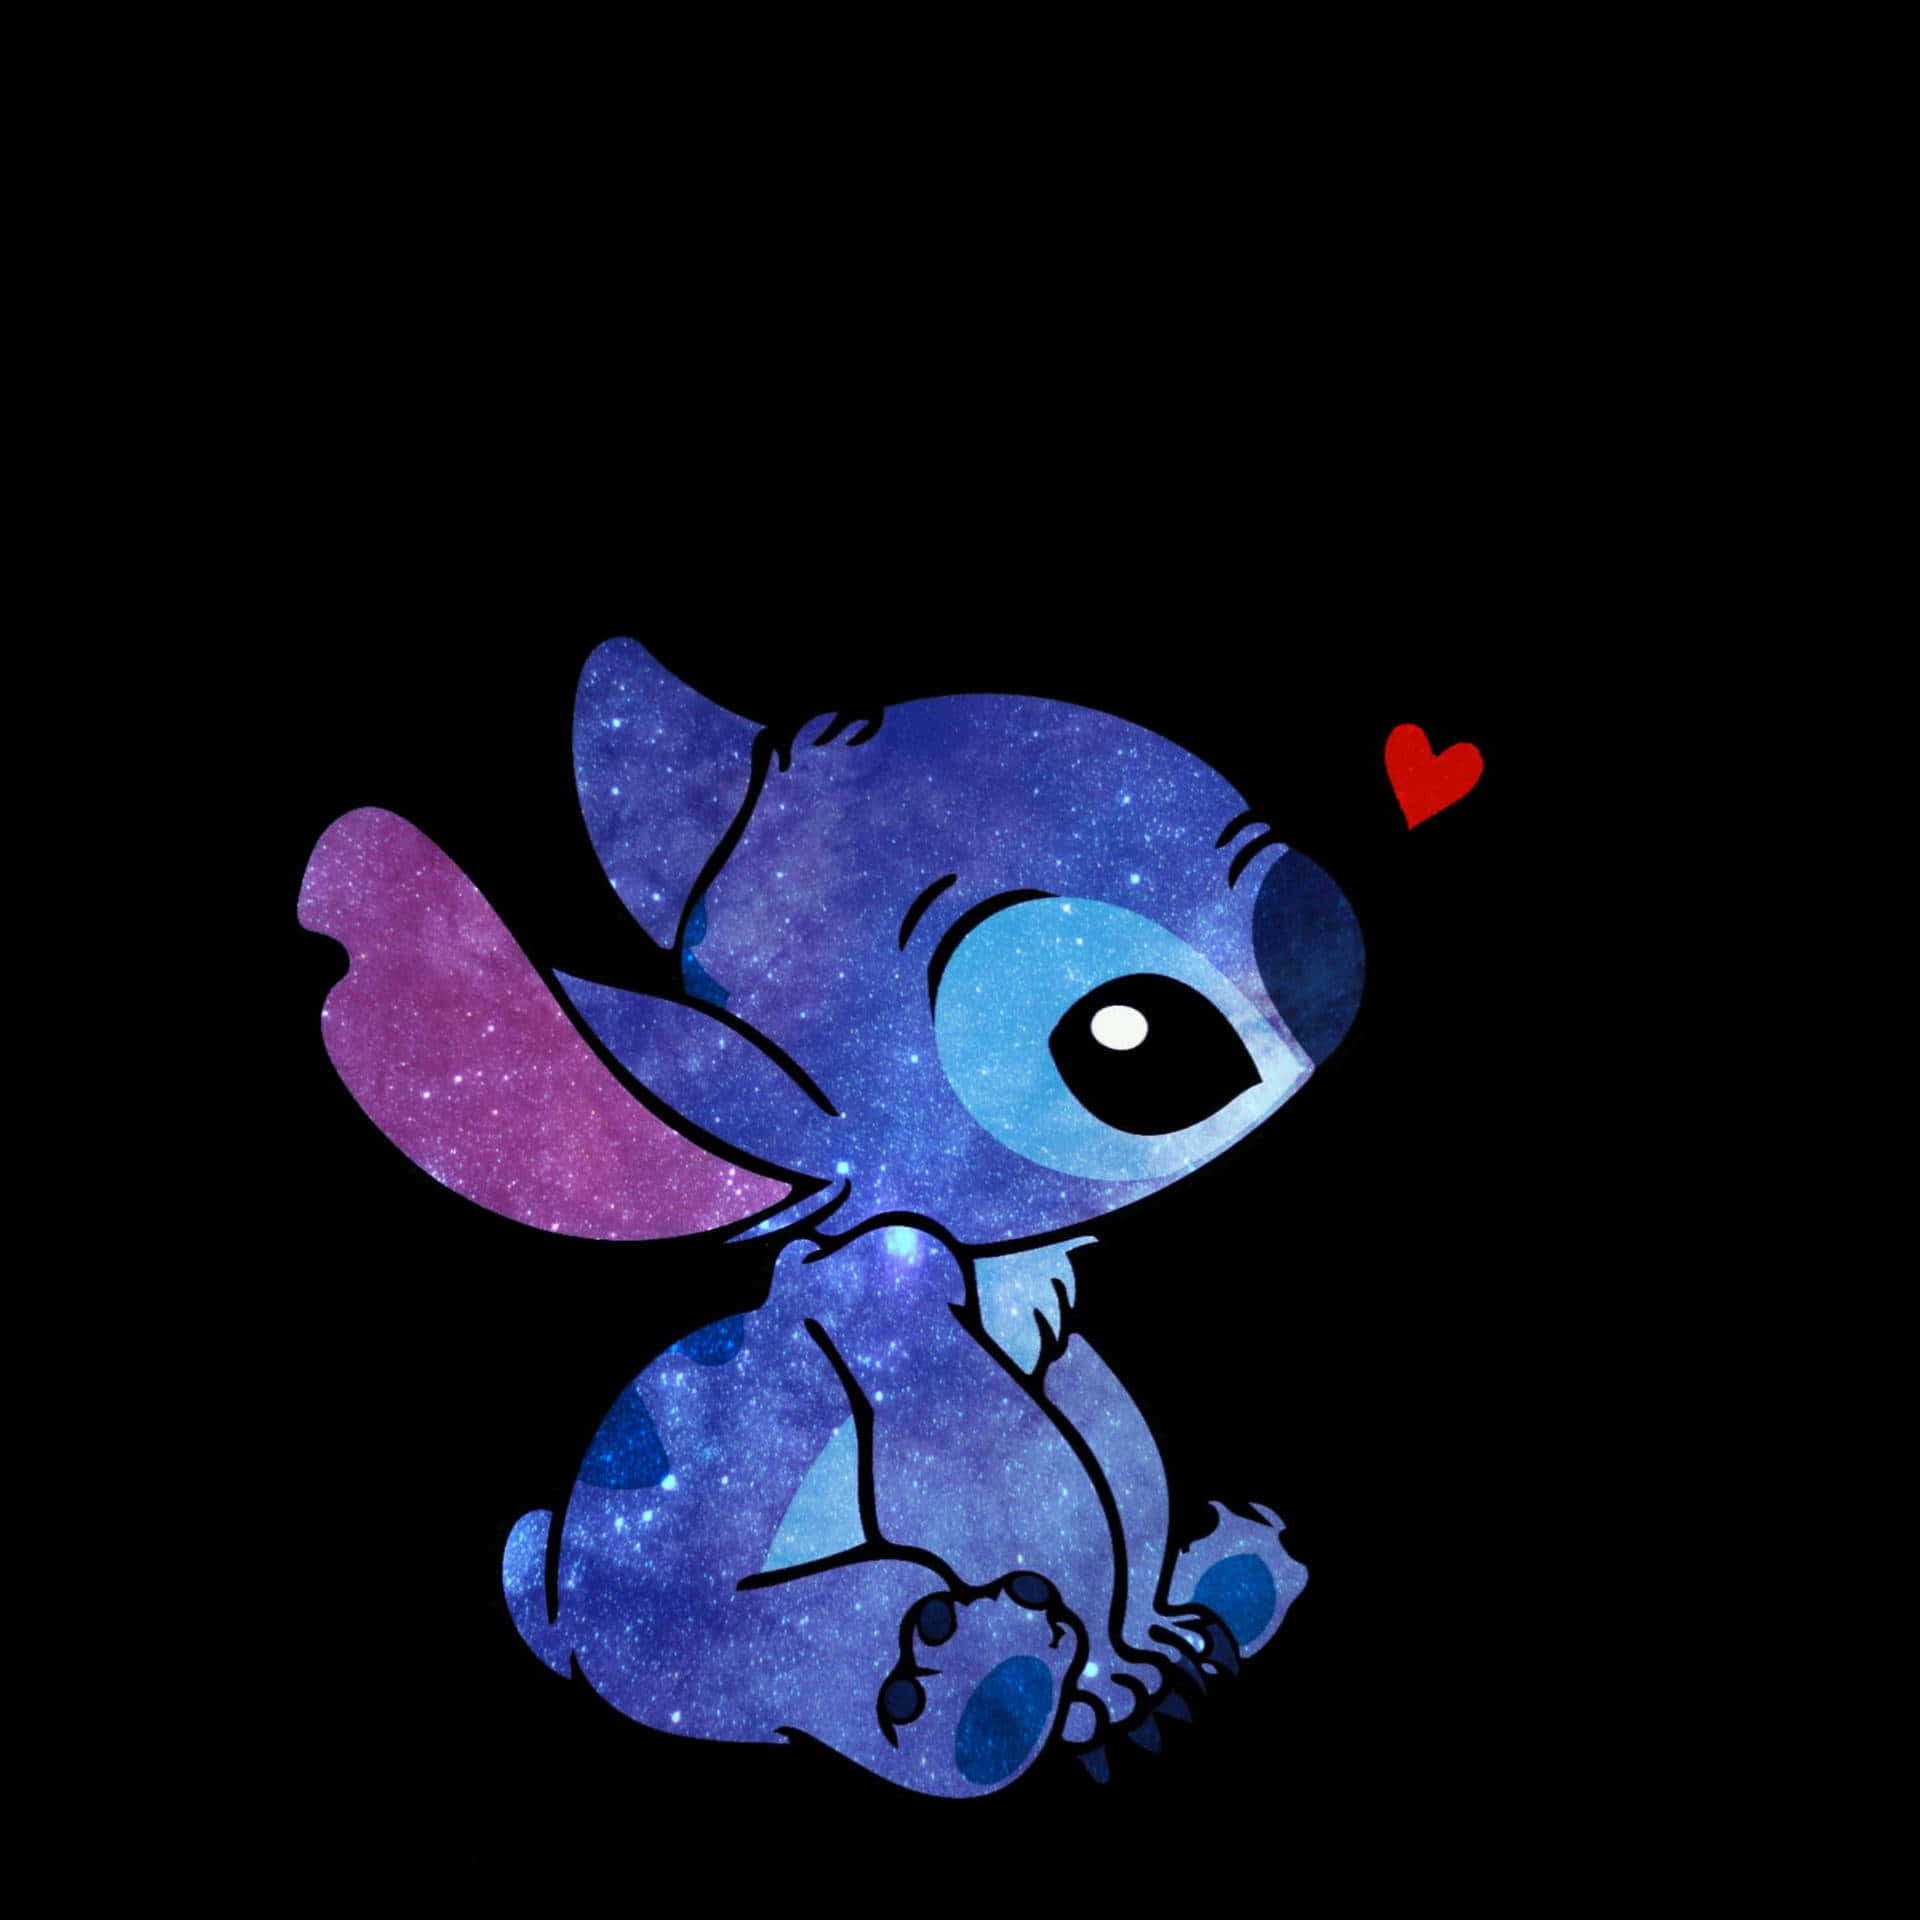 Sad Stitch reminds us that sometimes we all have to feel a little down Wallpaper